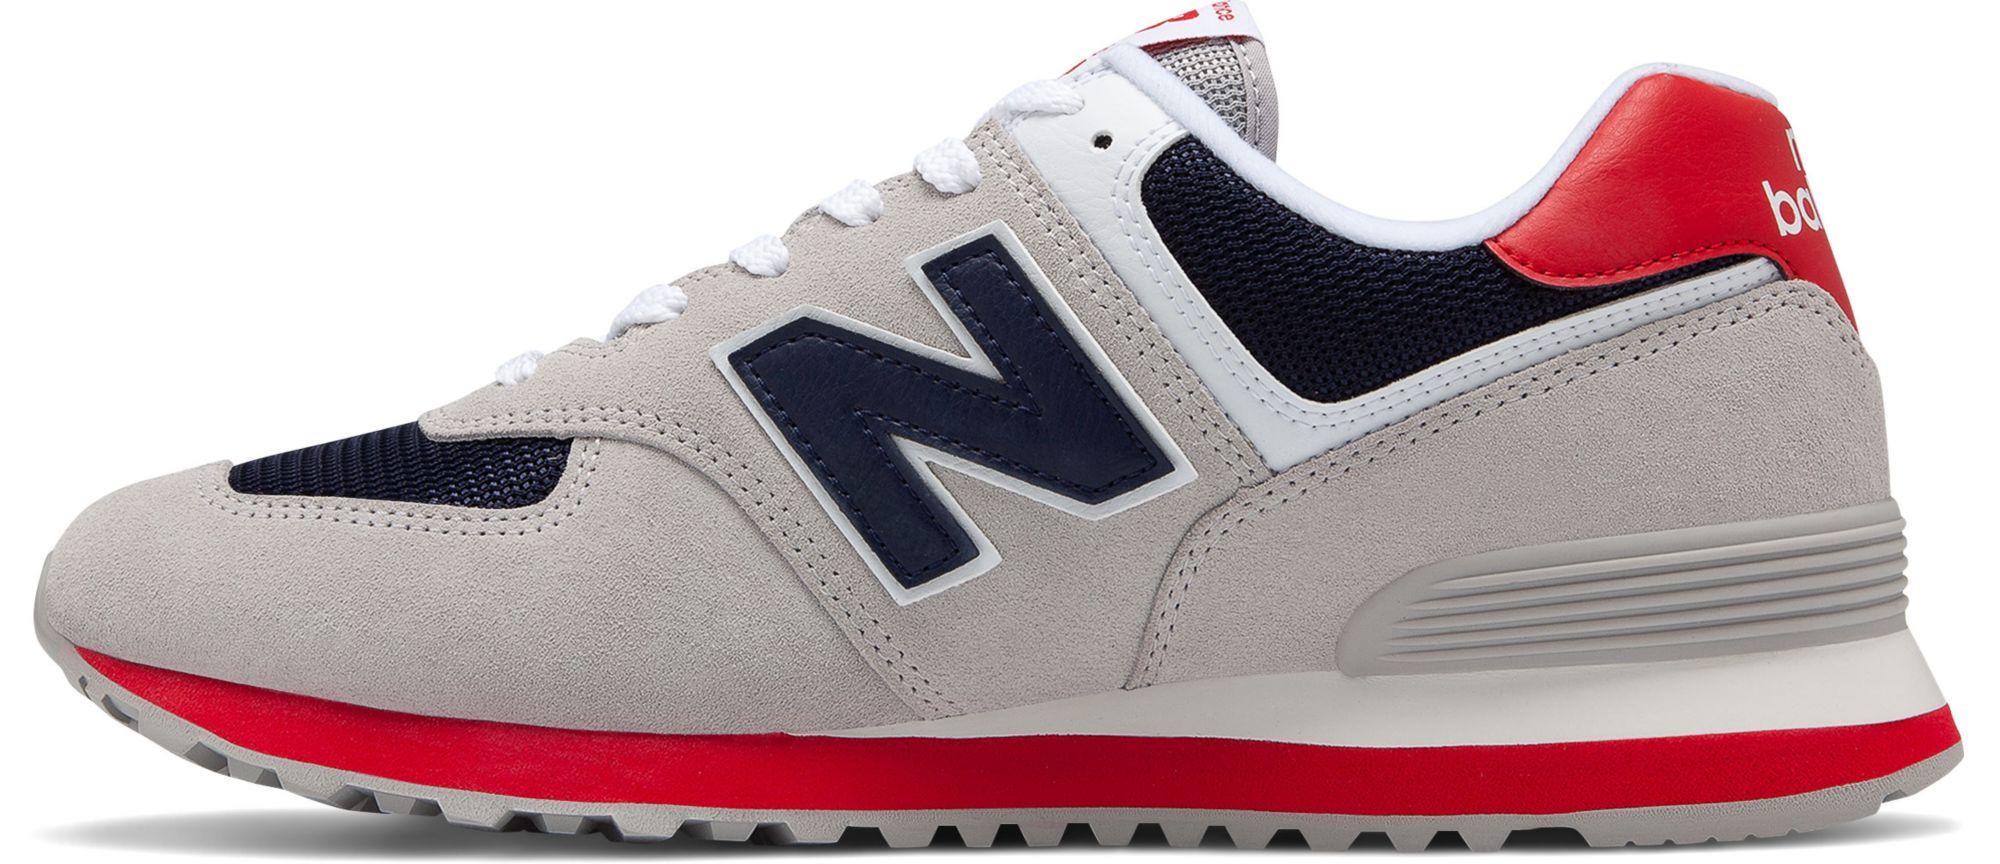 New Balance 574 Essentials Shoes in Grey/Red (Gray) for Men - Lyst